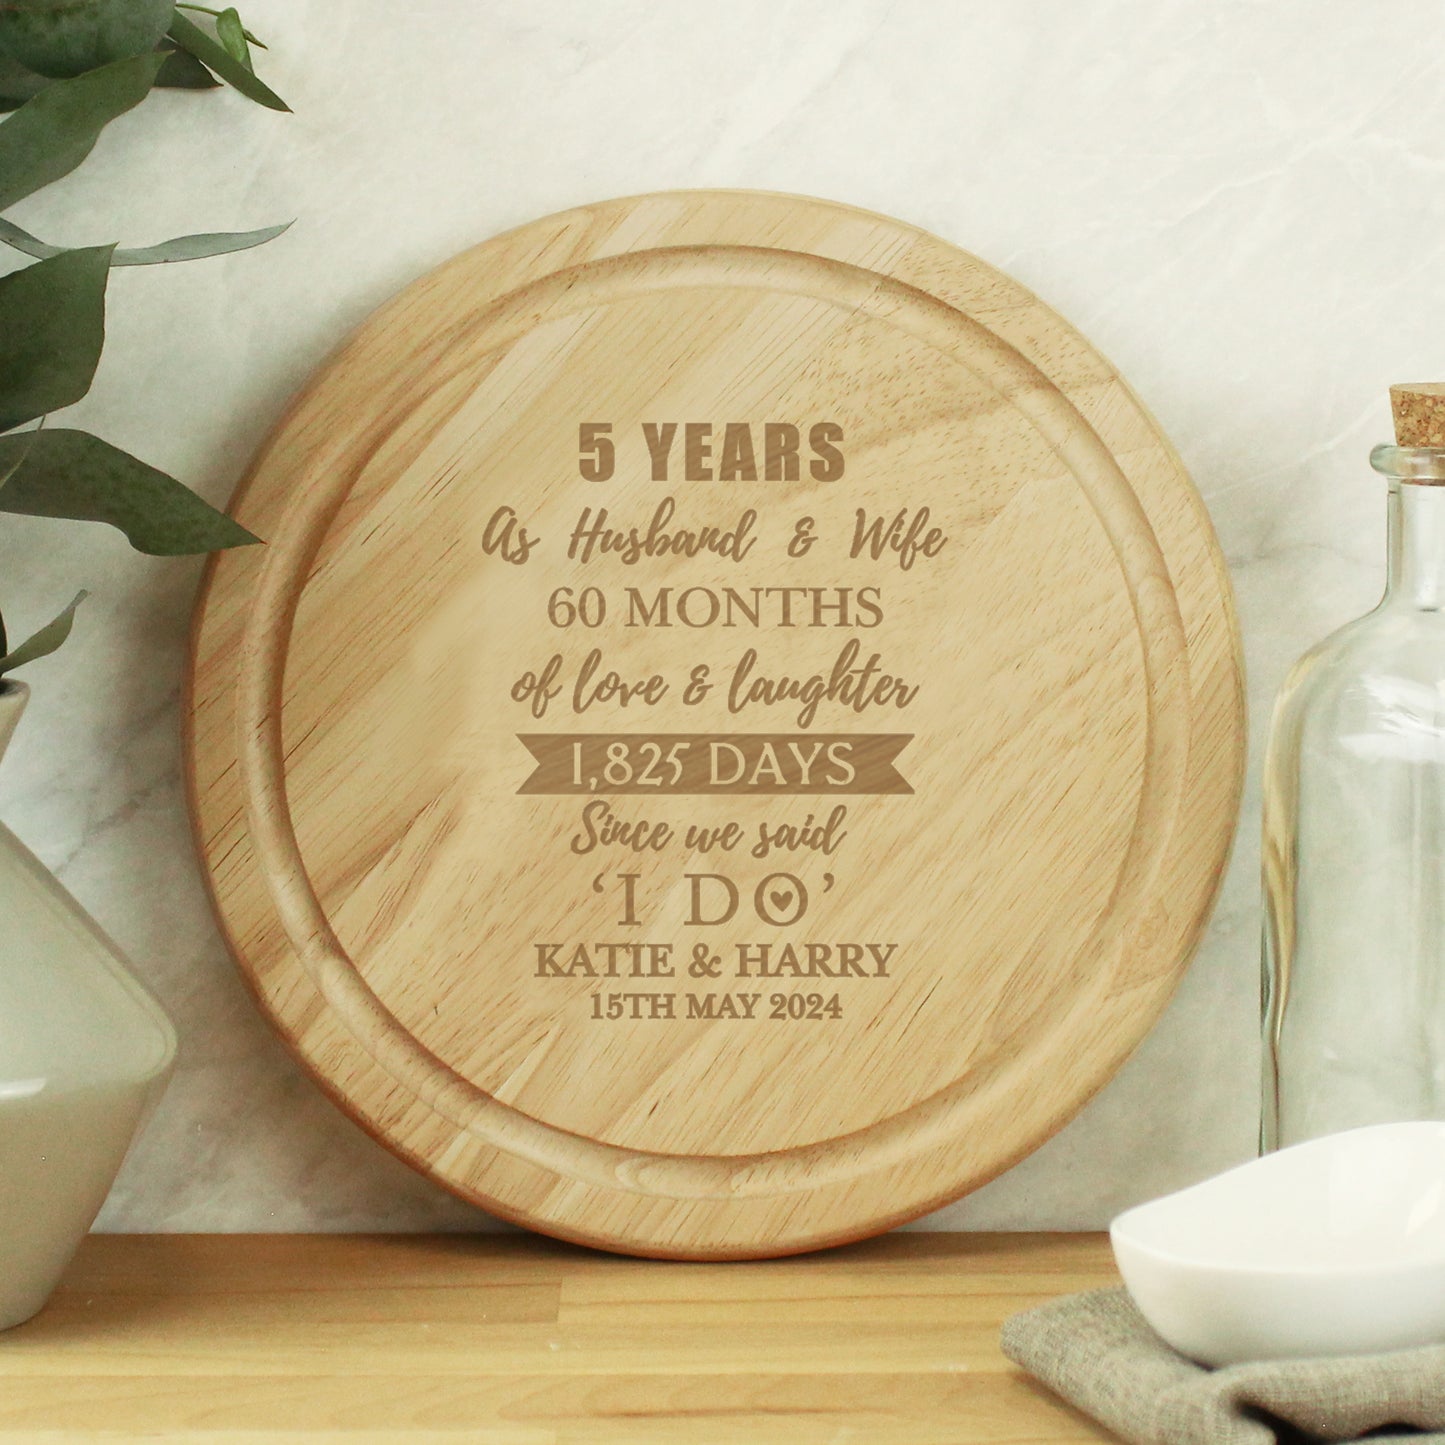 Personalised 5th Anniversary Heart Chopping Board - Personalise It!